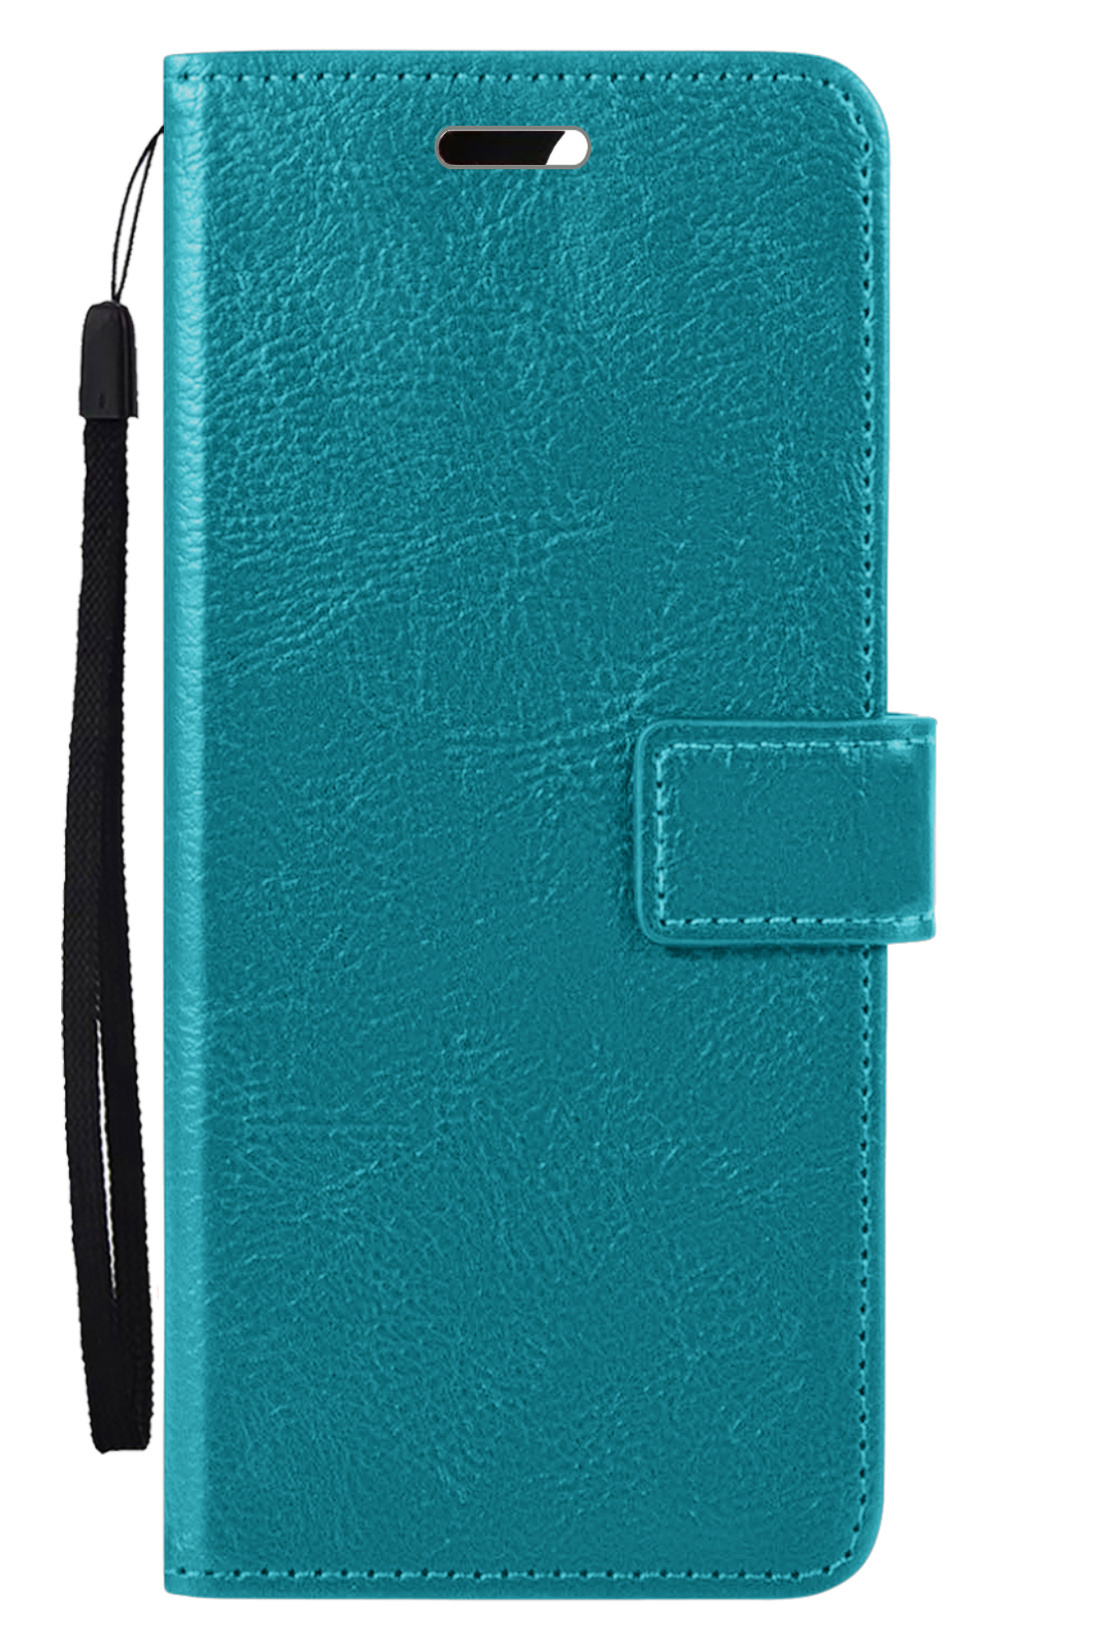 Samsung A23 Hoes Bookcase Flipcase Book Cover Met 2x Screenprotector - Samsung Galaxy A23 Hoesje Book Case - Turquoise